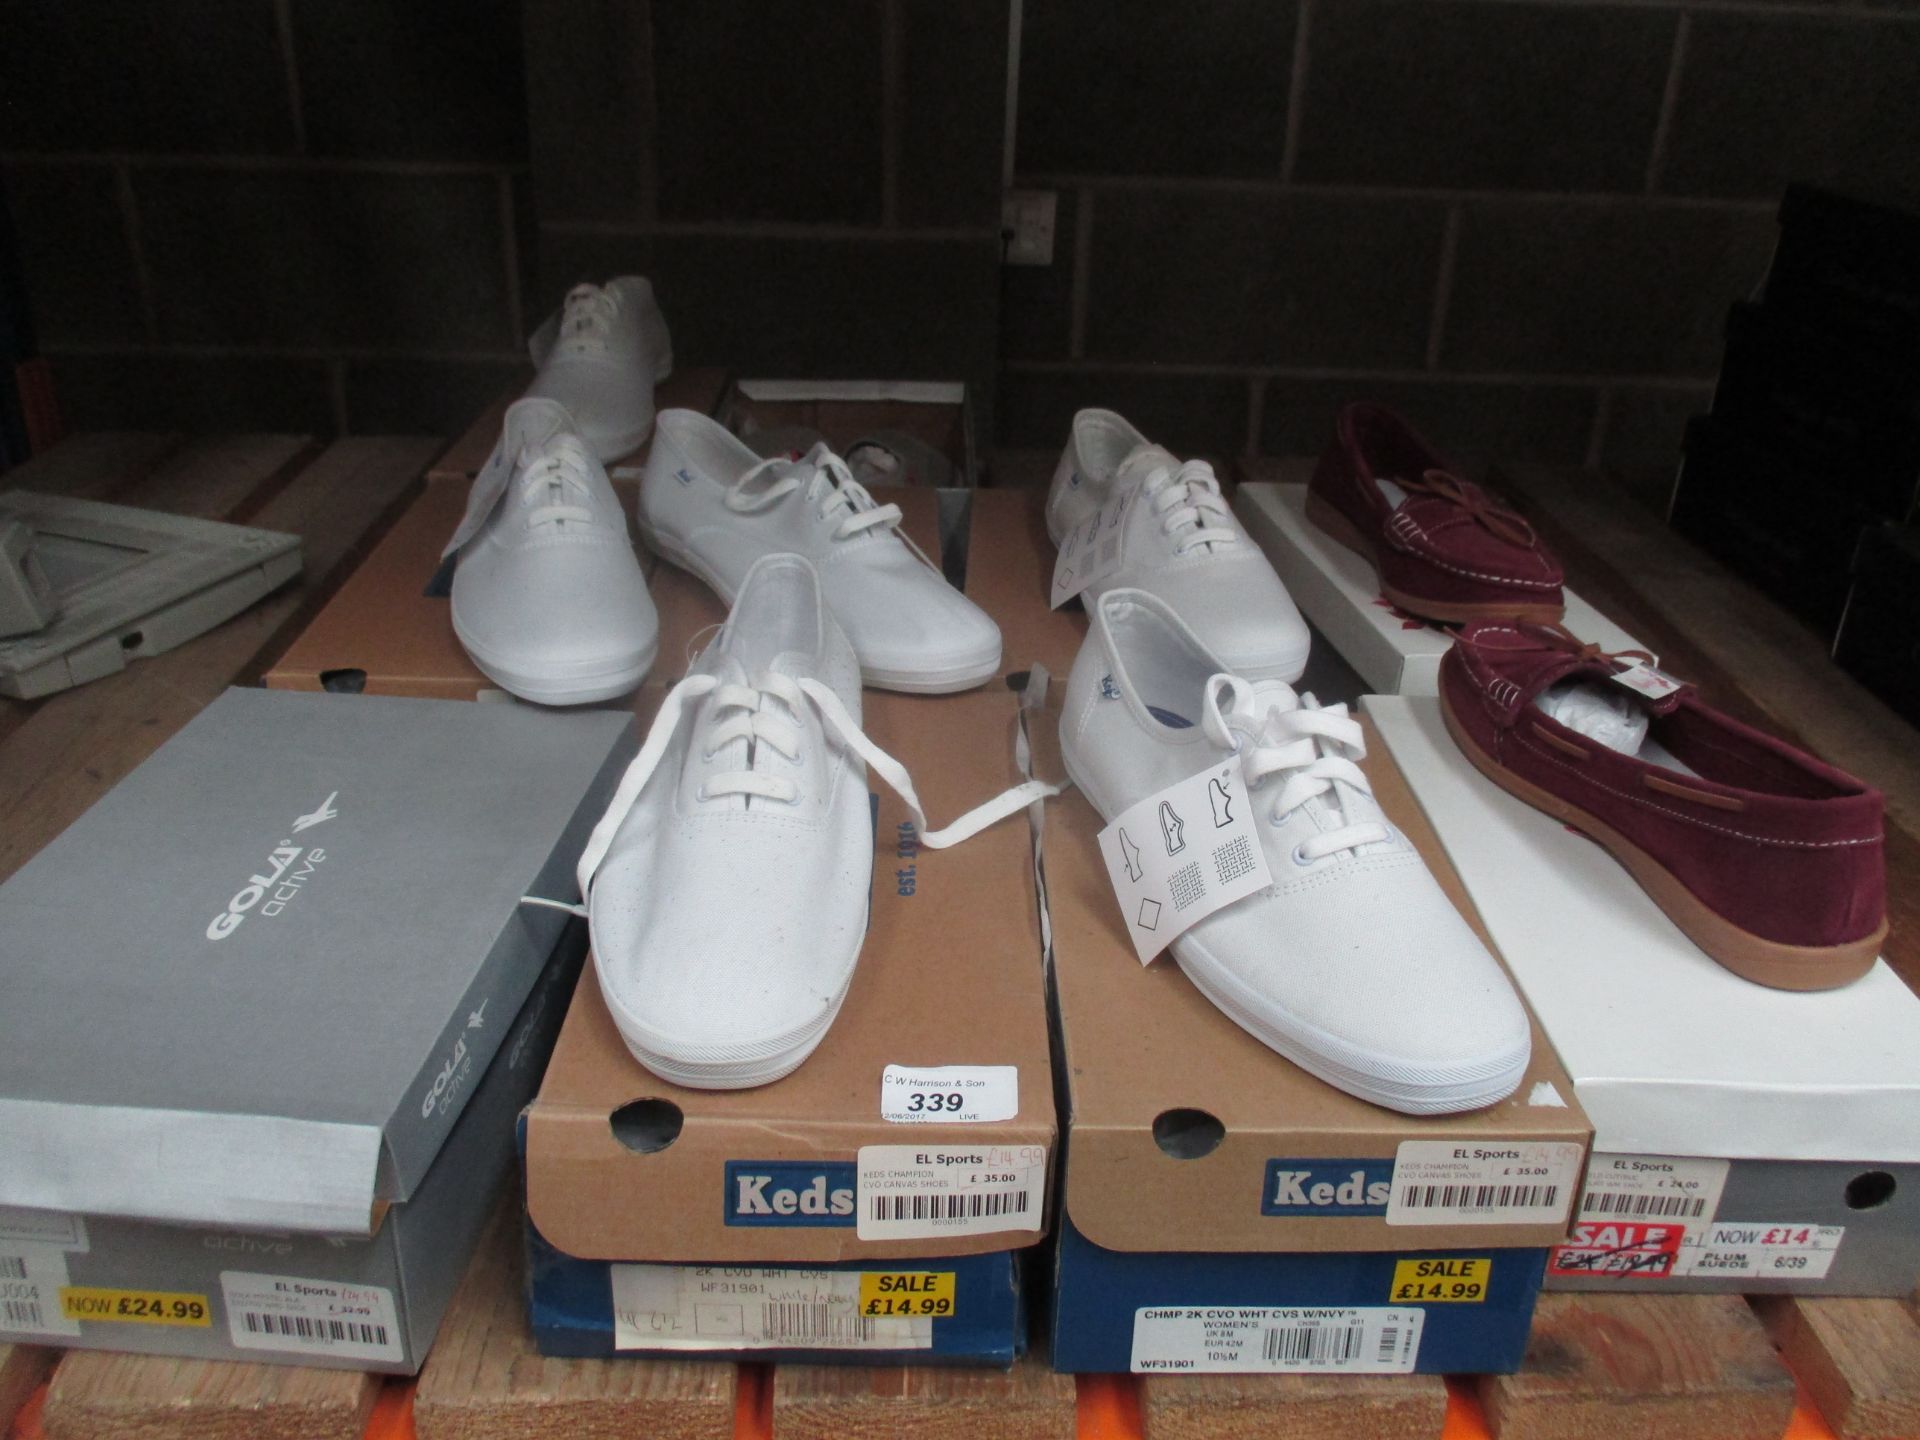 10 x assorted pairs of shoes/trainers by Keds,